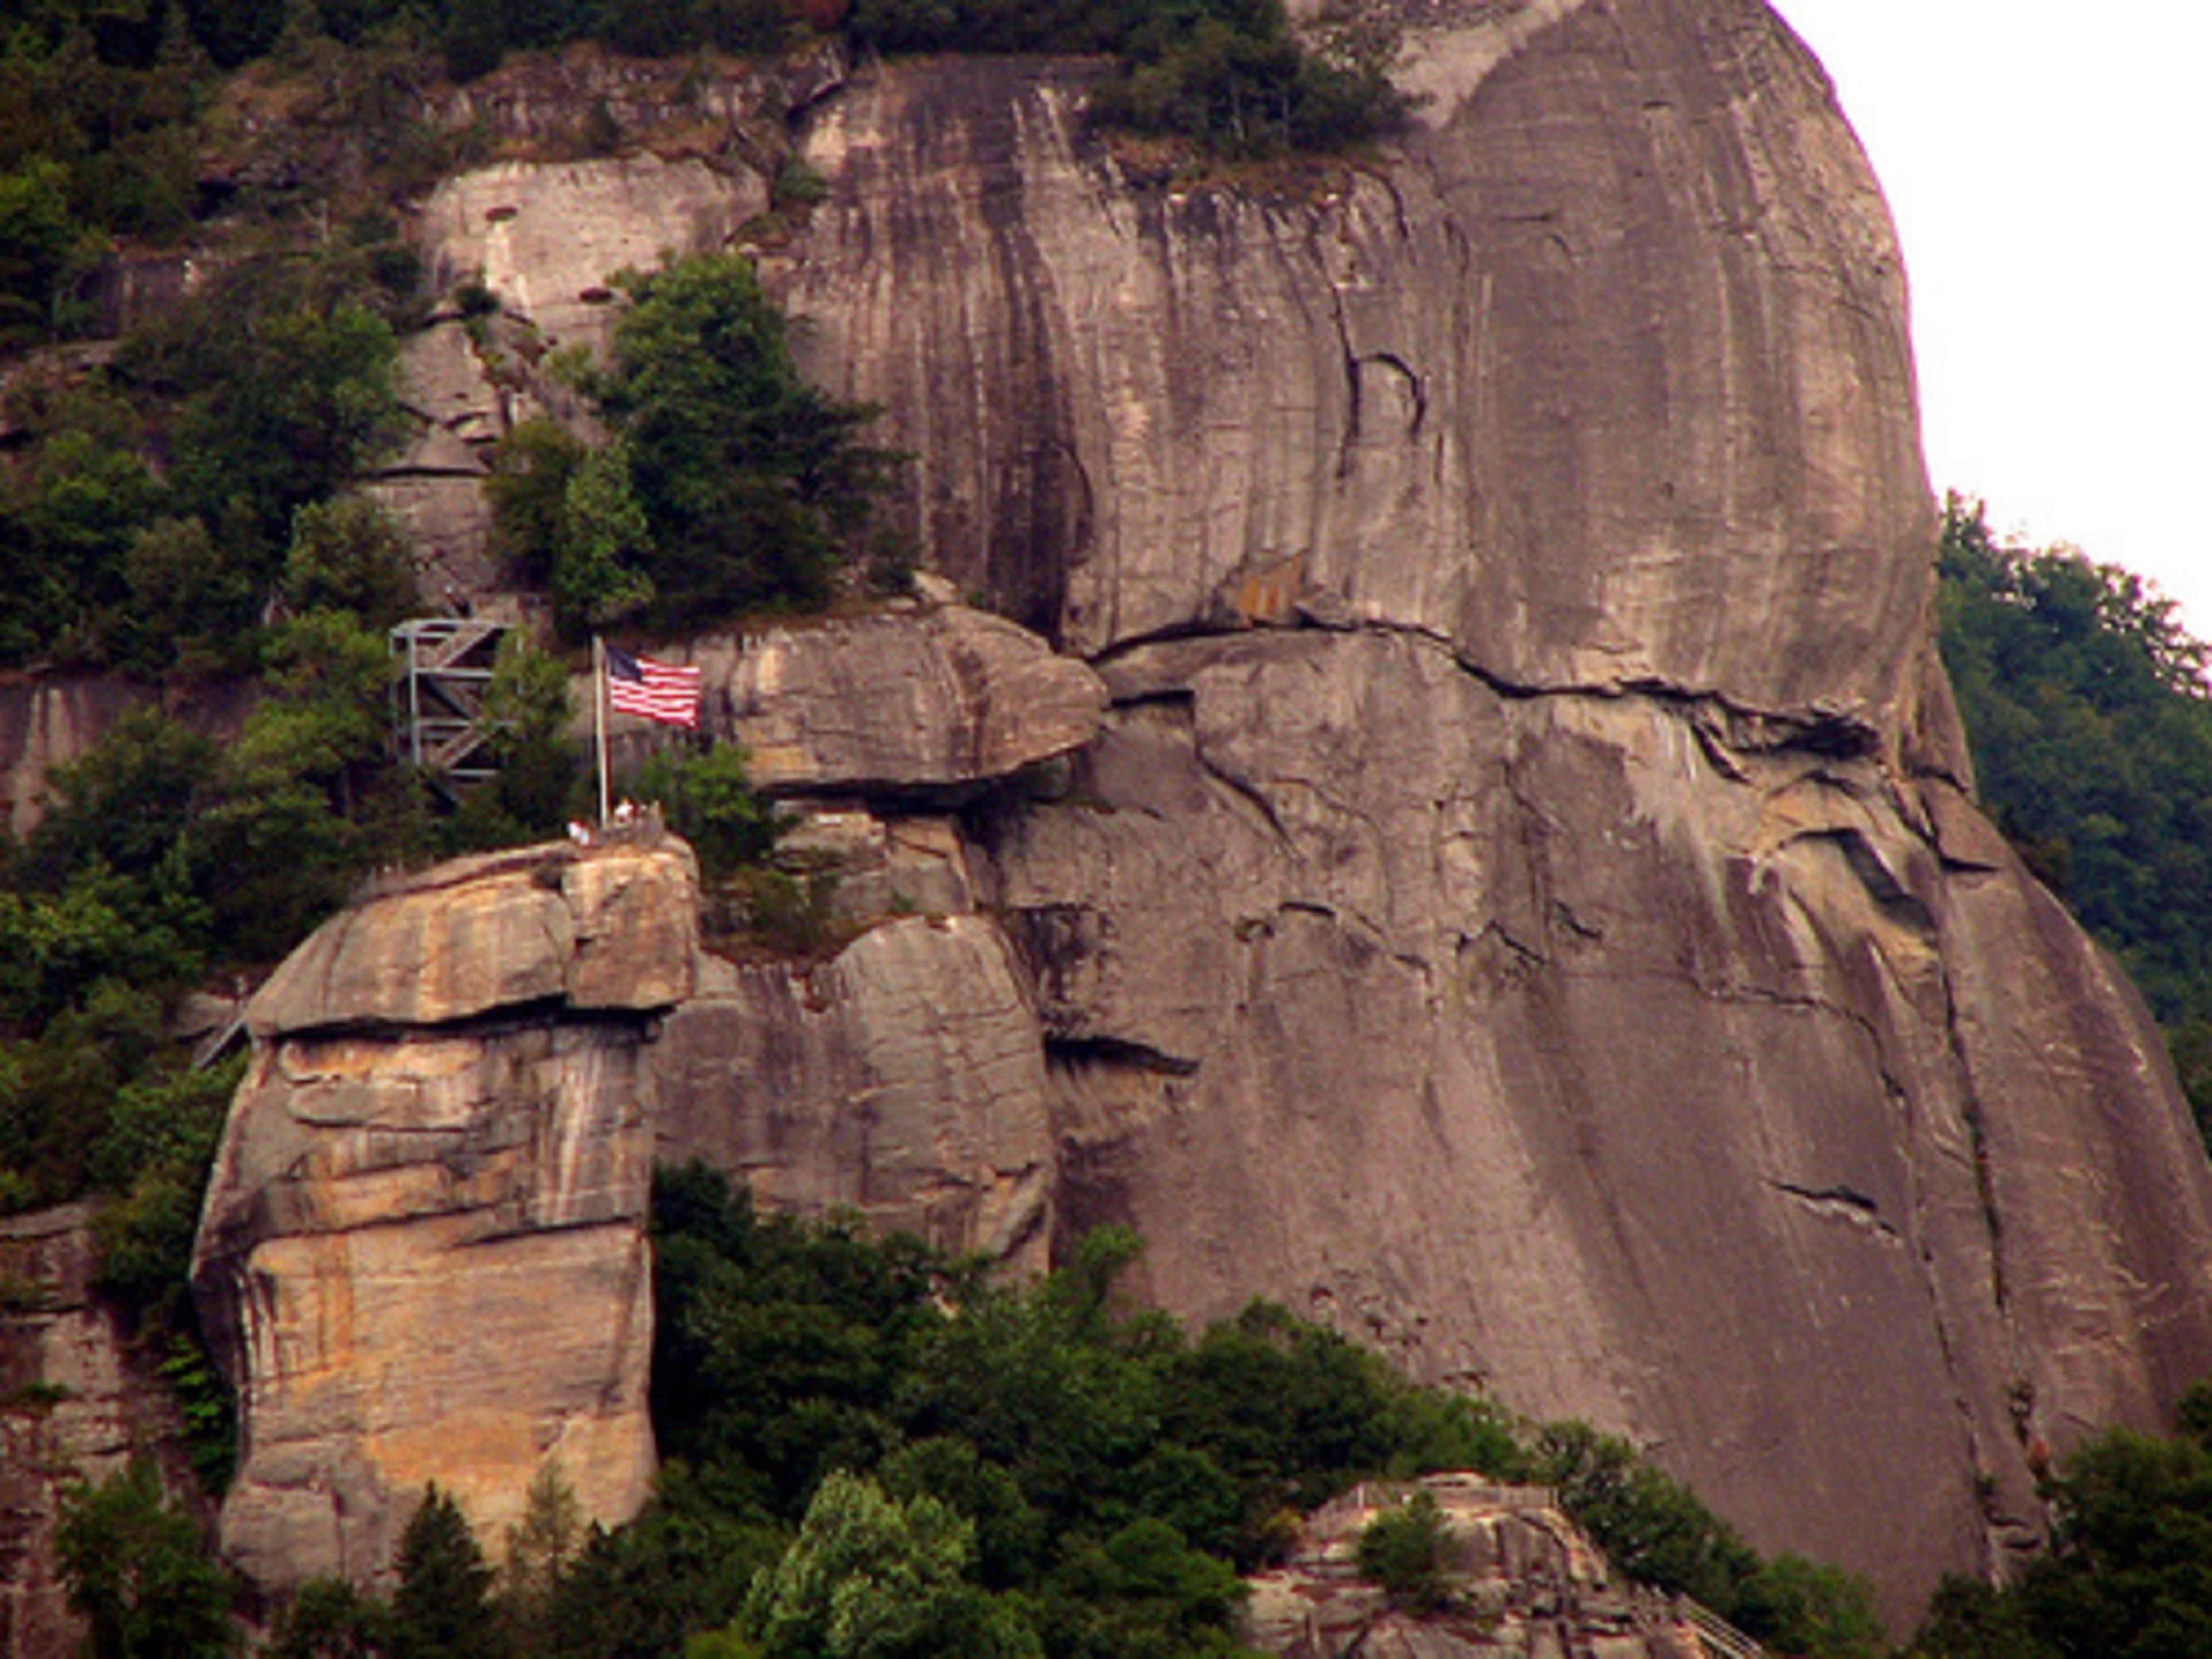 Explore the spectacular views at Chimney Rock State Park